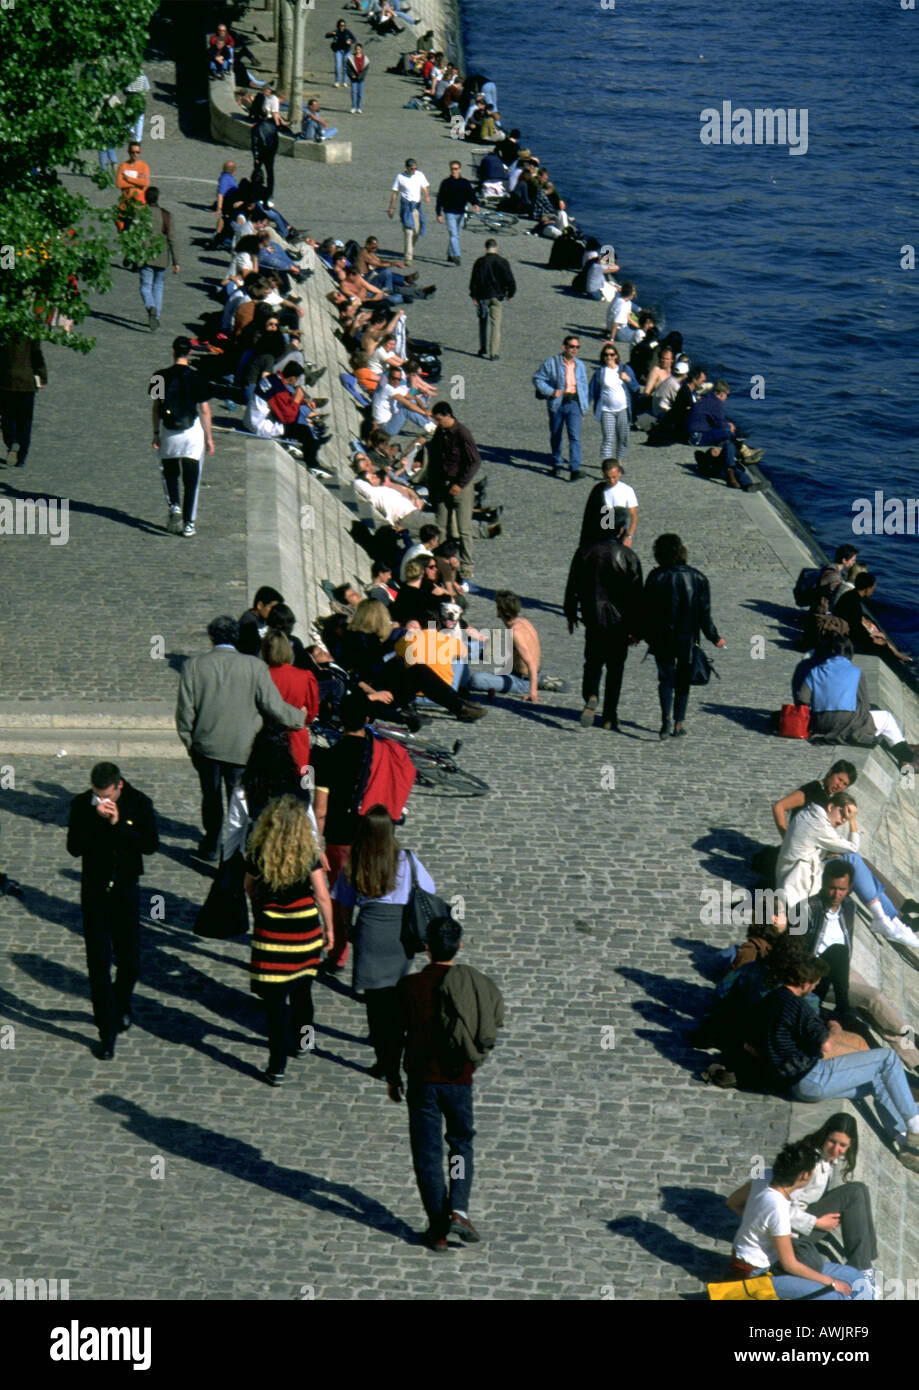 People walking and sitting by water Stock Photo